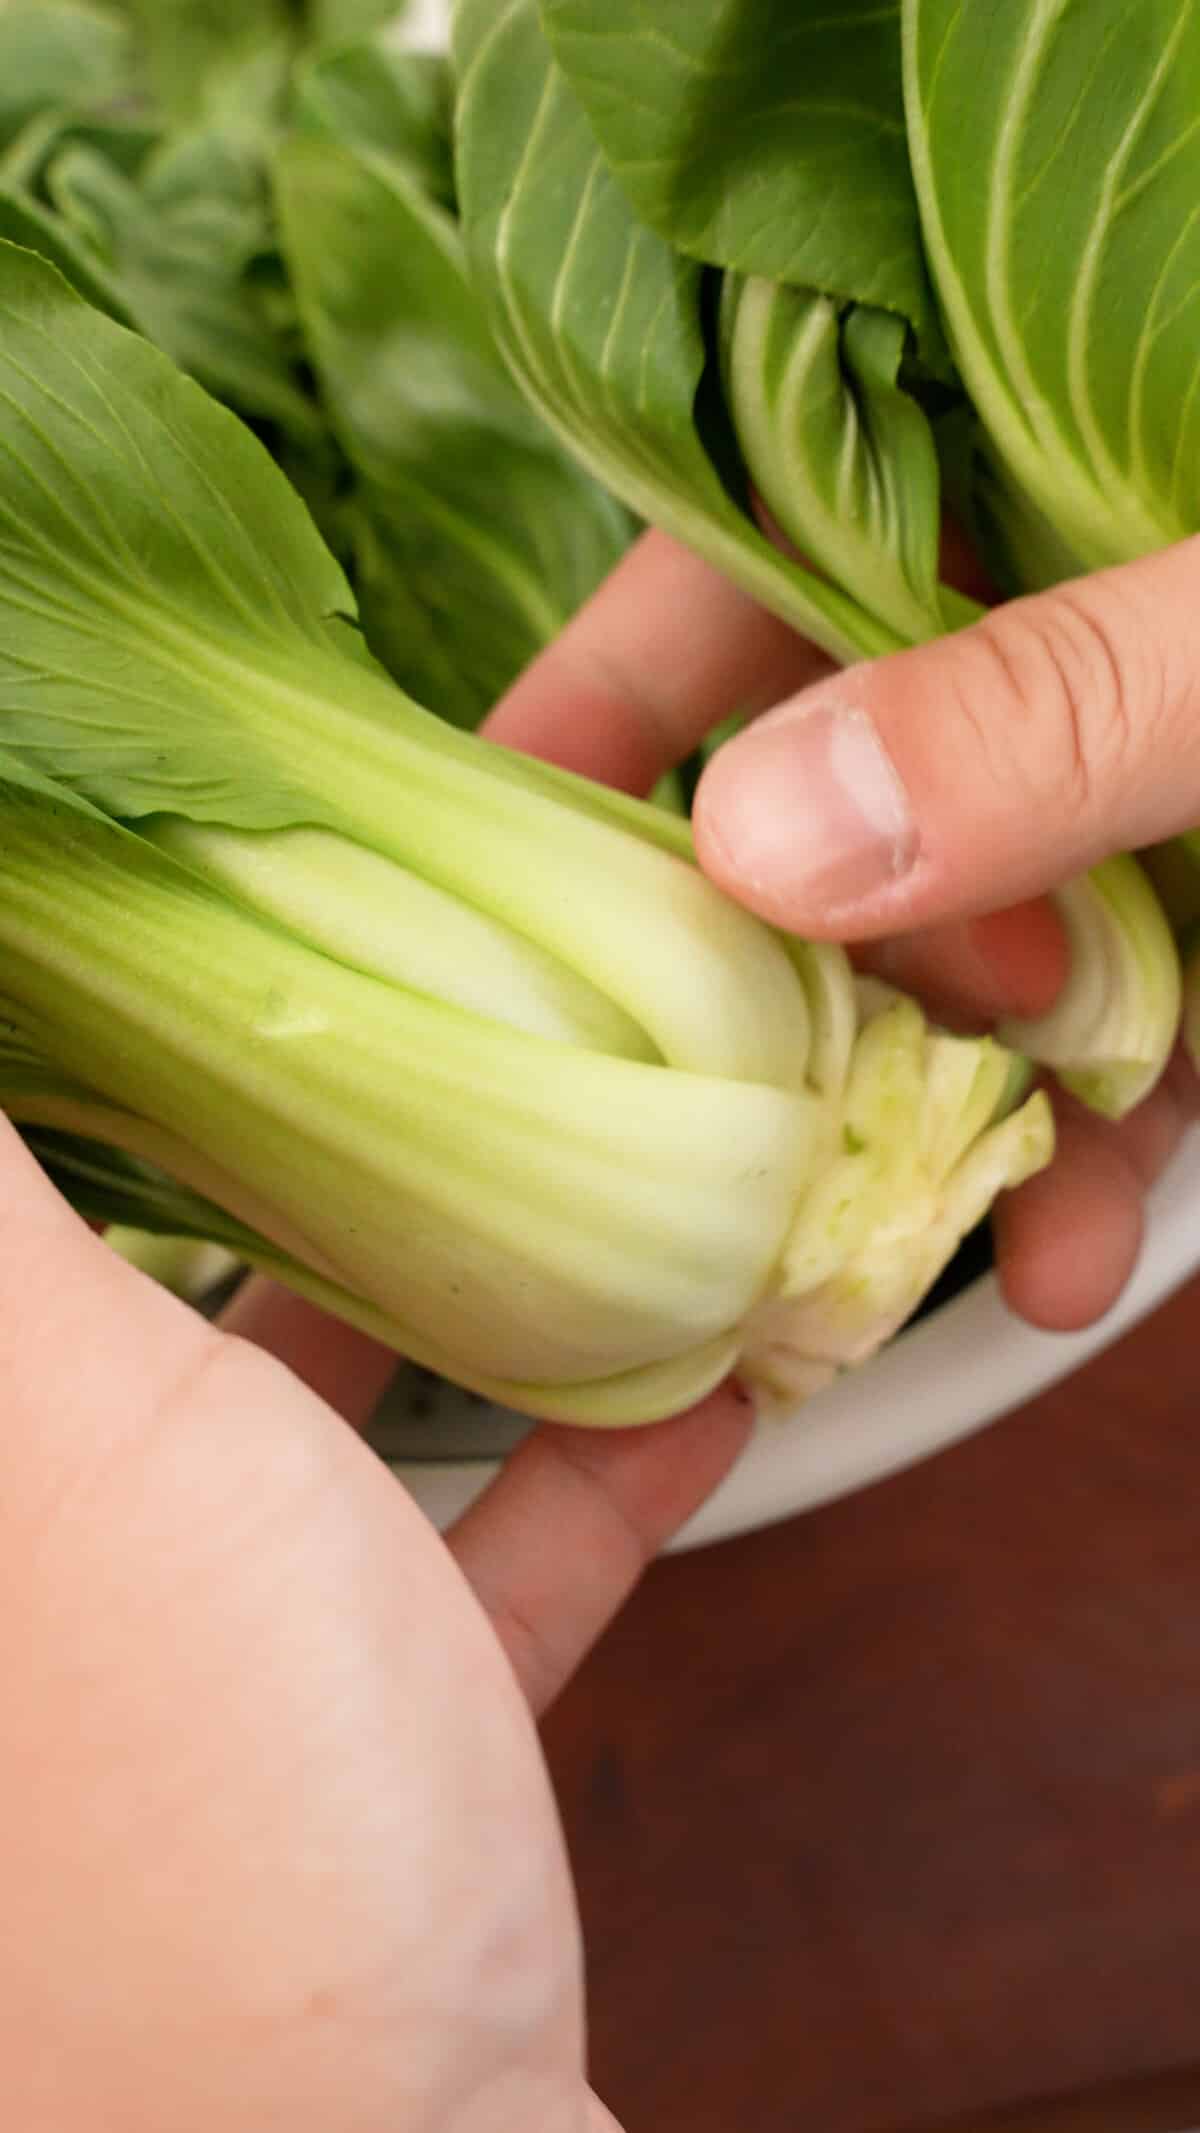 Hands picking bok choy leaves from the stem.